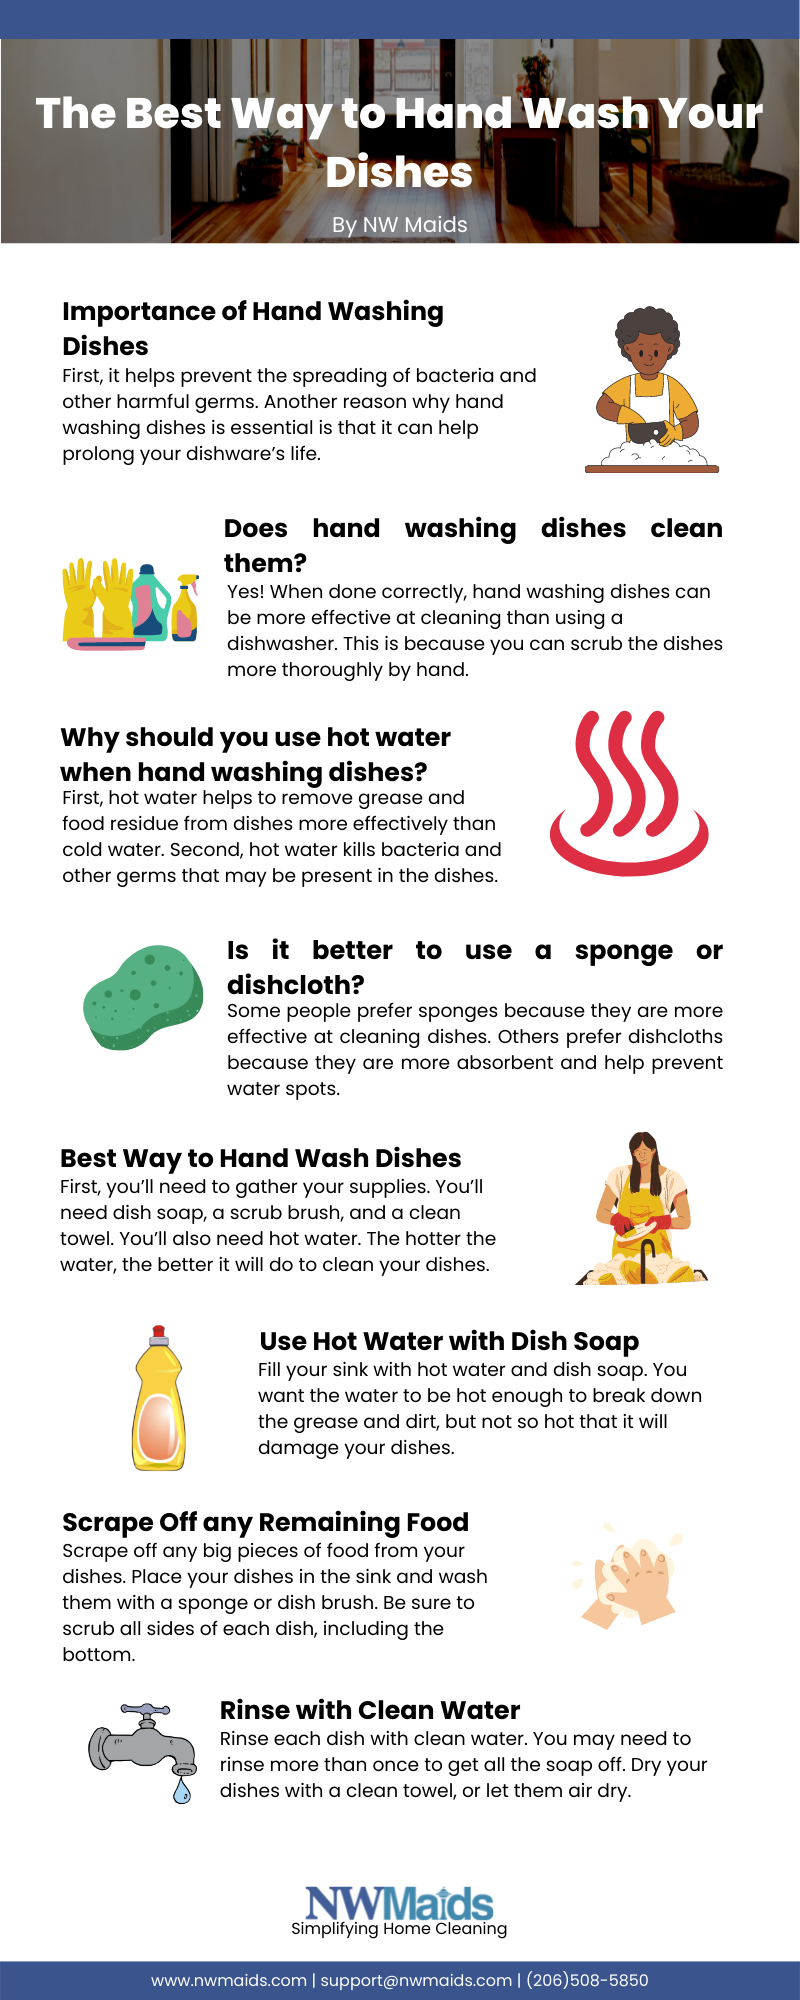 https://nwmaids.com/wp-content/uploads/2022/08/the-best-way-to-hand-.wash-your-dishes.png